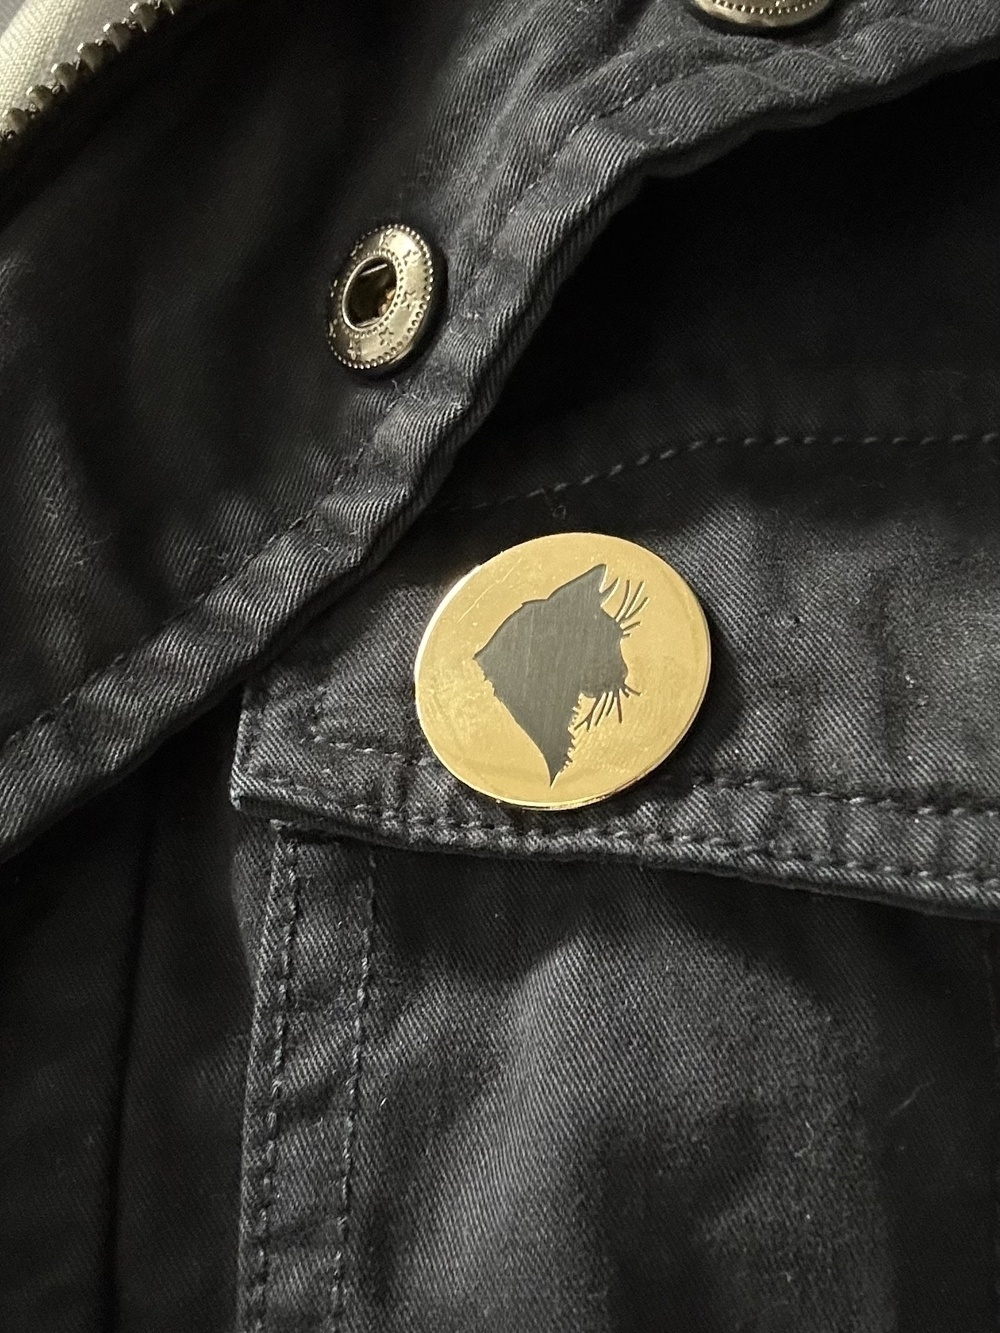 A round gold coloured badge with a black silhouette of a cat head side on. The badge is pinned to a dark jacket.